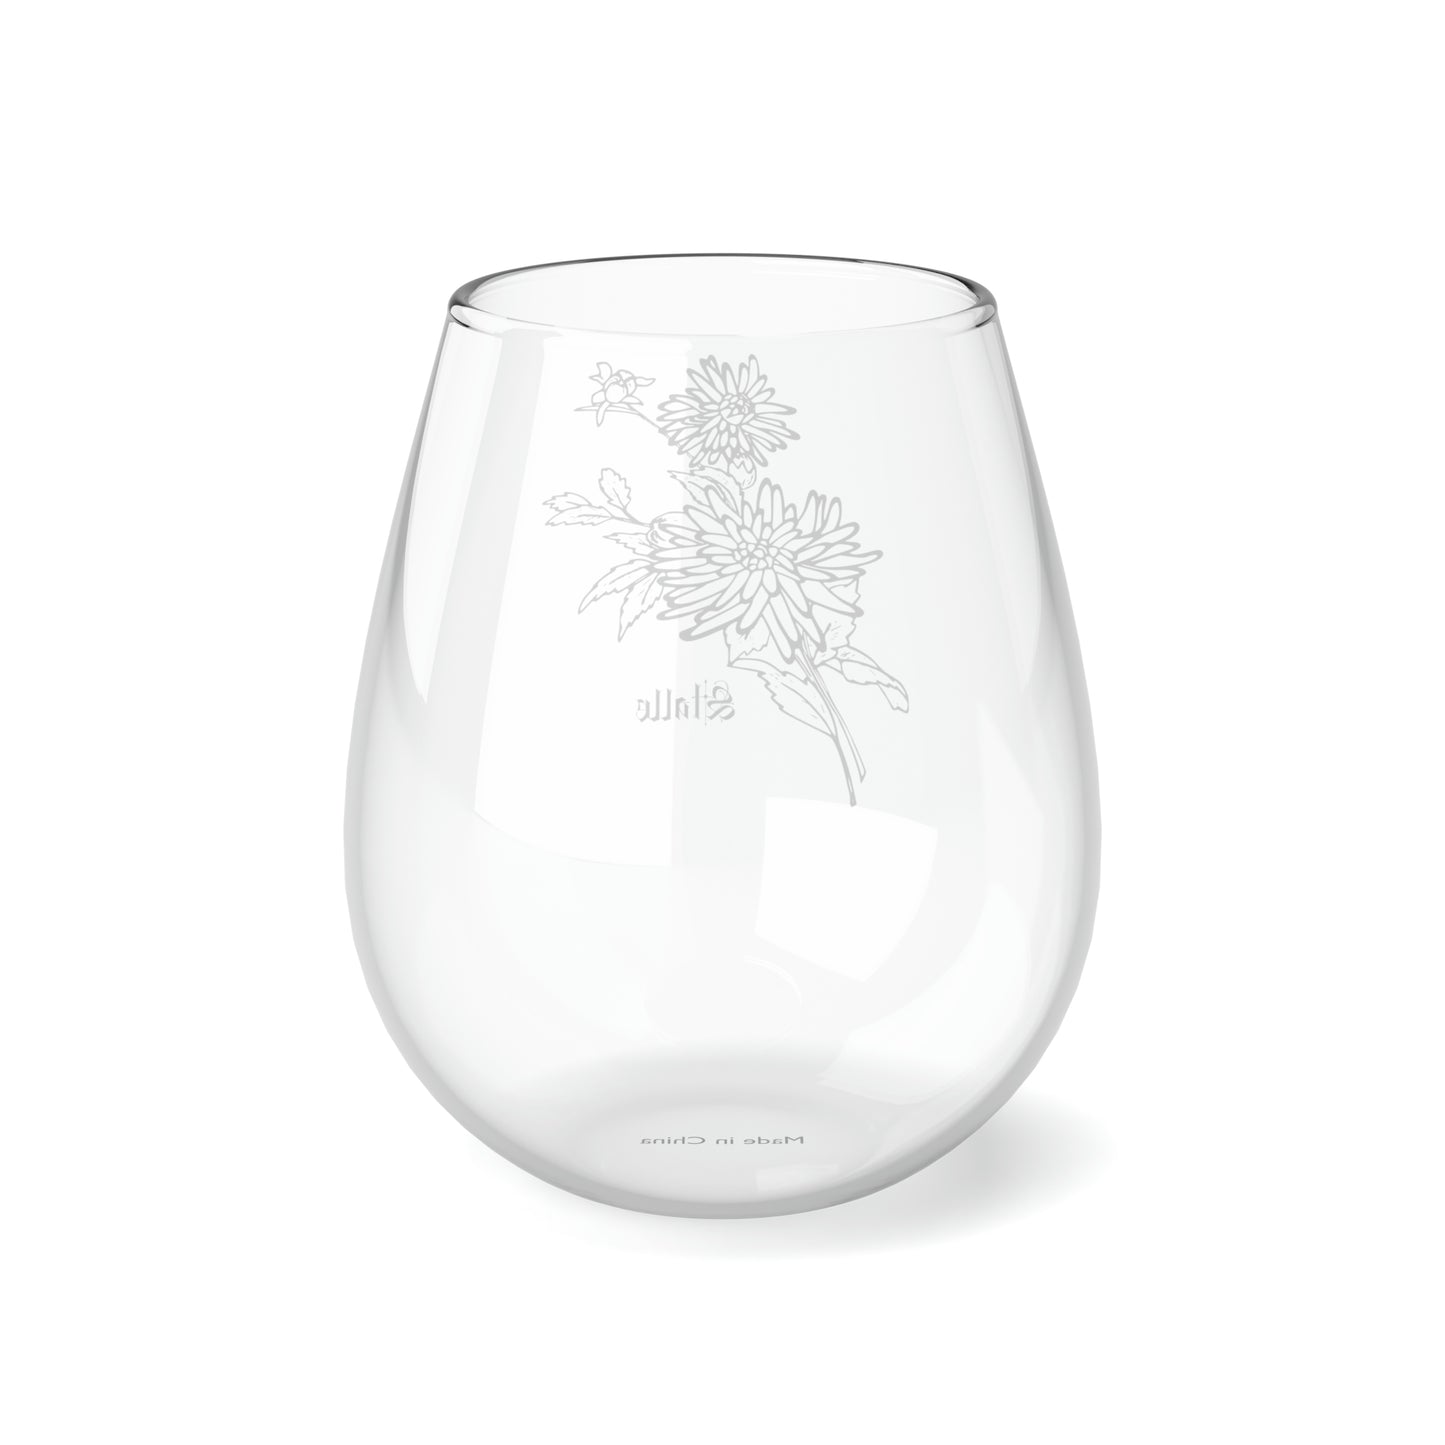 November PERSONALIZED Birth Flower Wine Glass, Birth Flower Gifts, Birth Flower wine glass, Birth Flower Gifts for Women, Gift for coworker, sister gift, birthday gift, Valentine gift, Stemless Wine Glass, 11.75oz